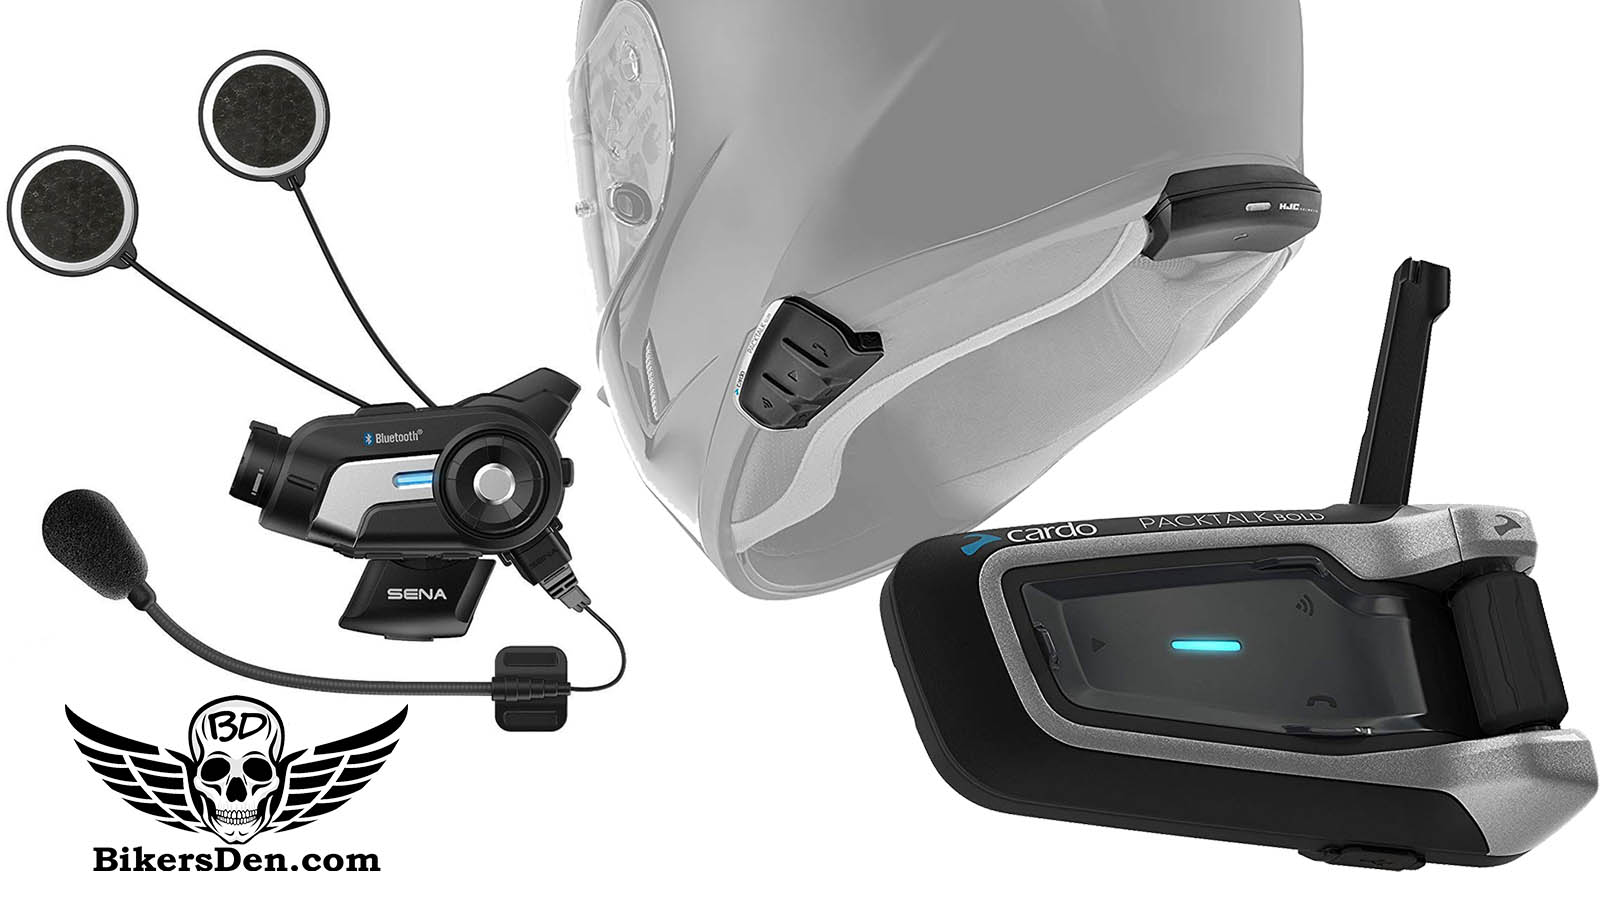 Motorcycle Communication Systems - Bluetooth Headsets & Intercoms